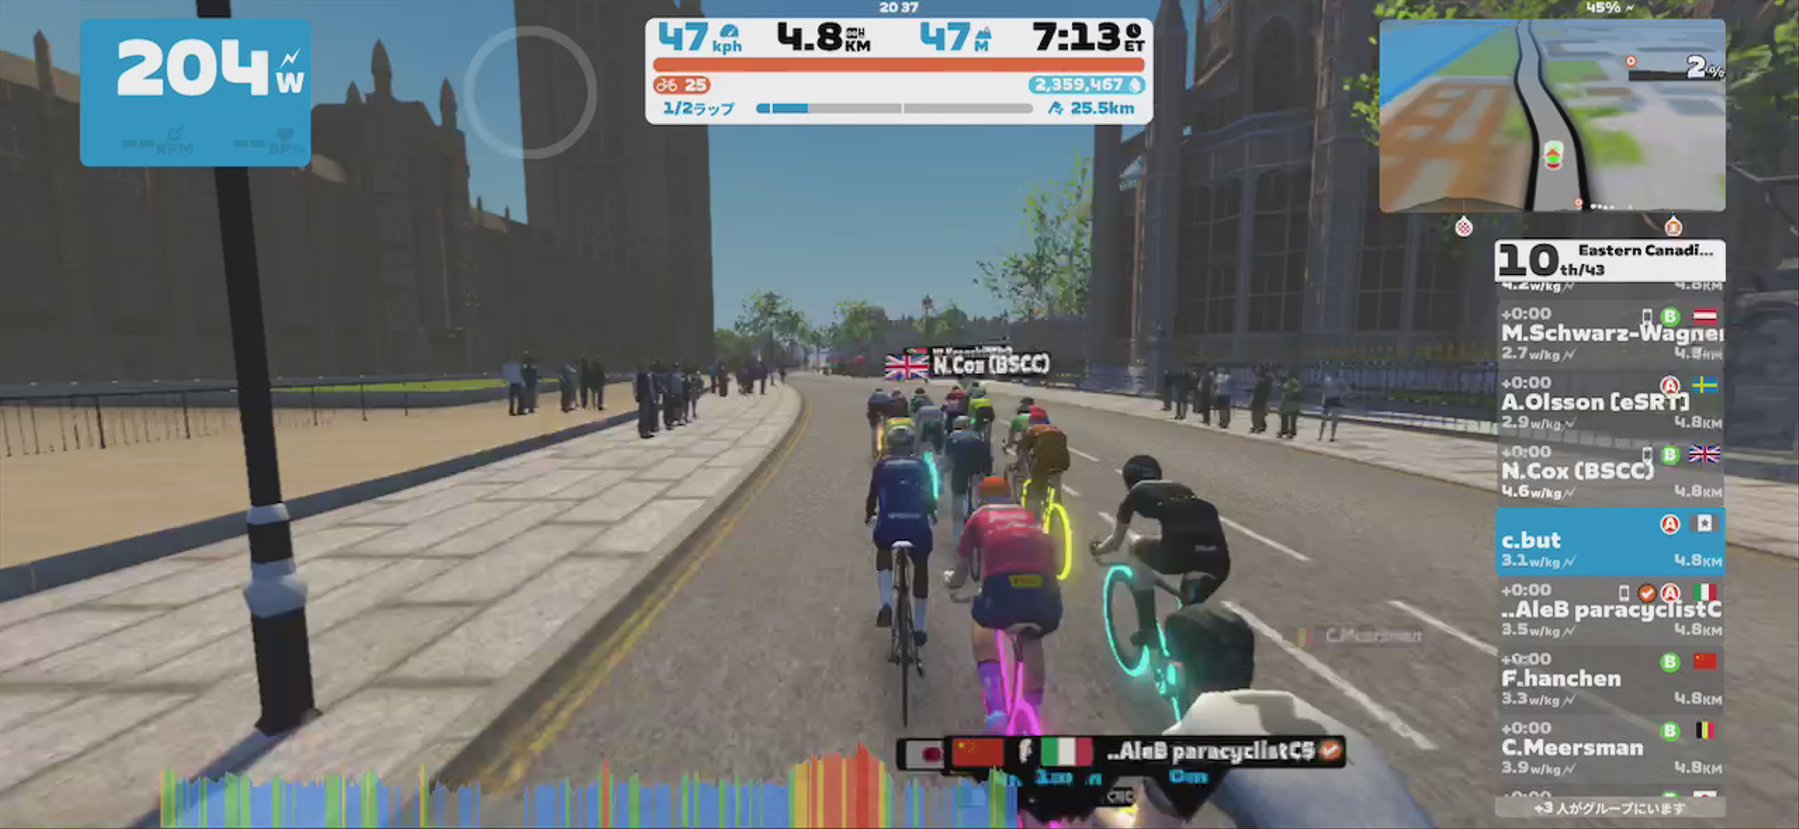 Zwift - Race: Eastern Canadian Quest Racing Series (ECQRS) (A) on London Loop in London